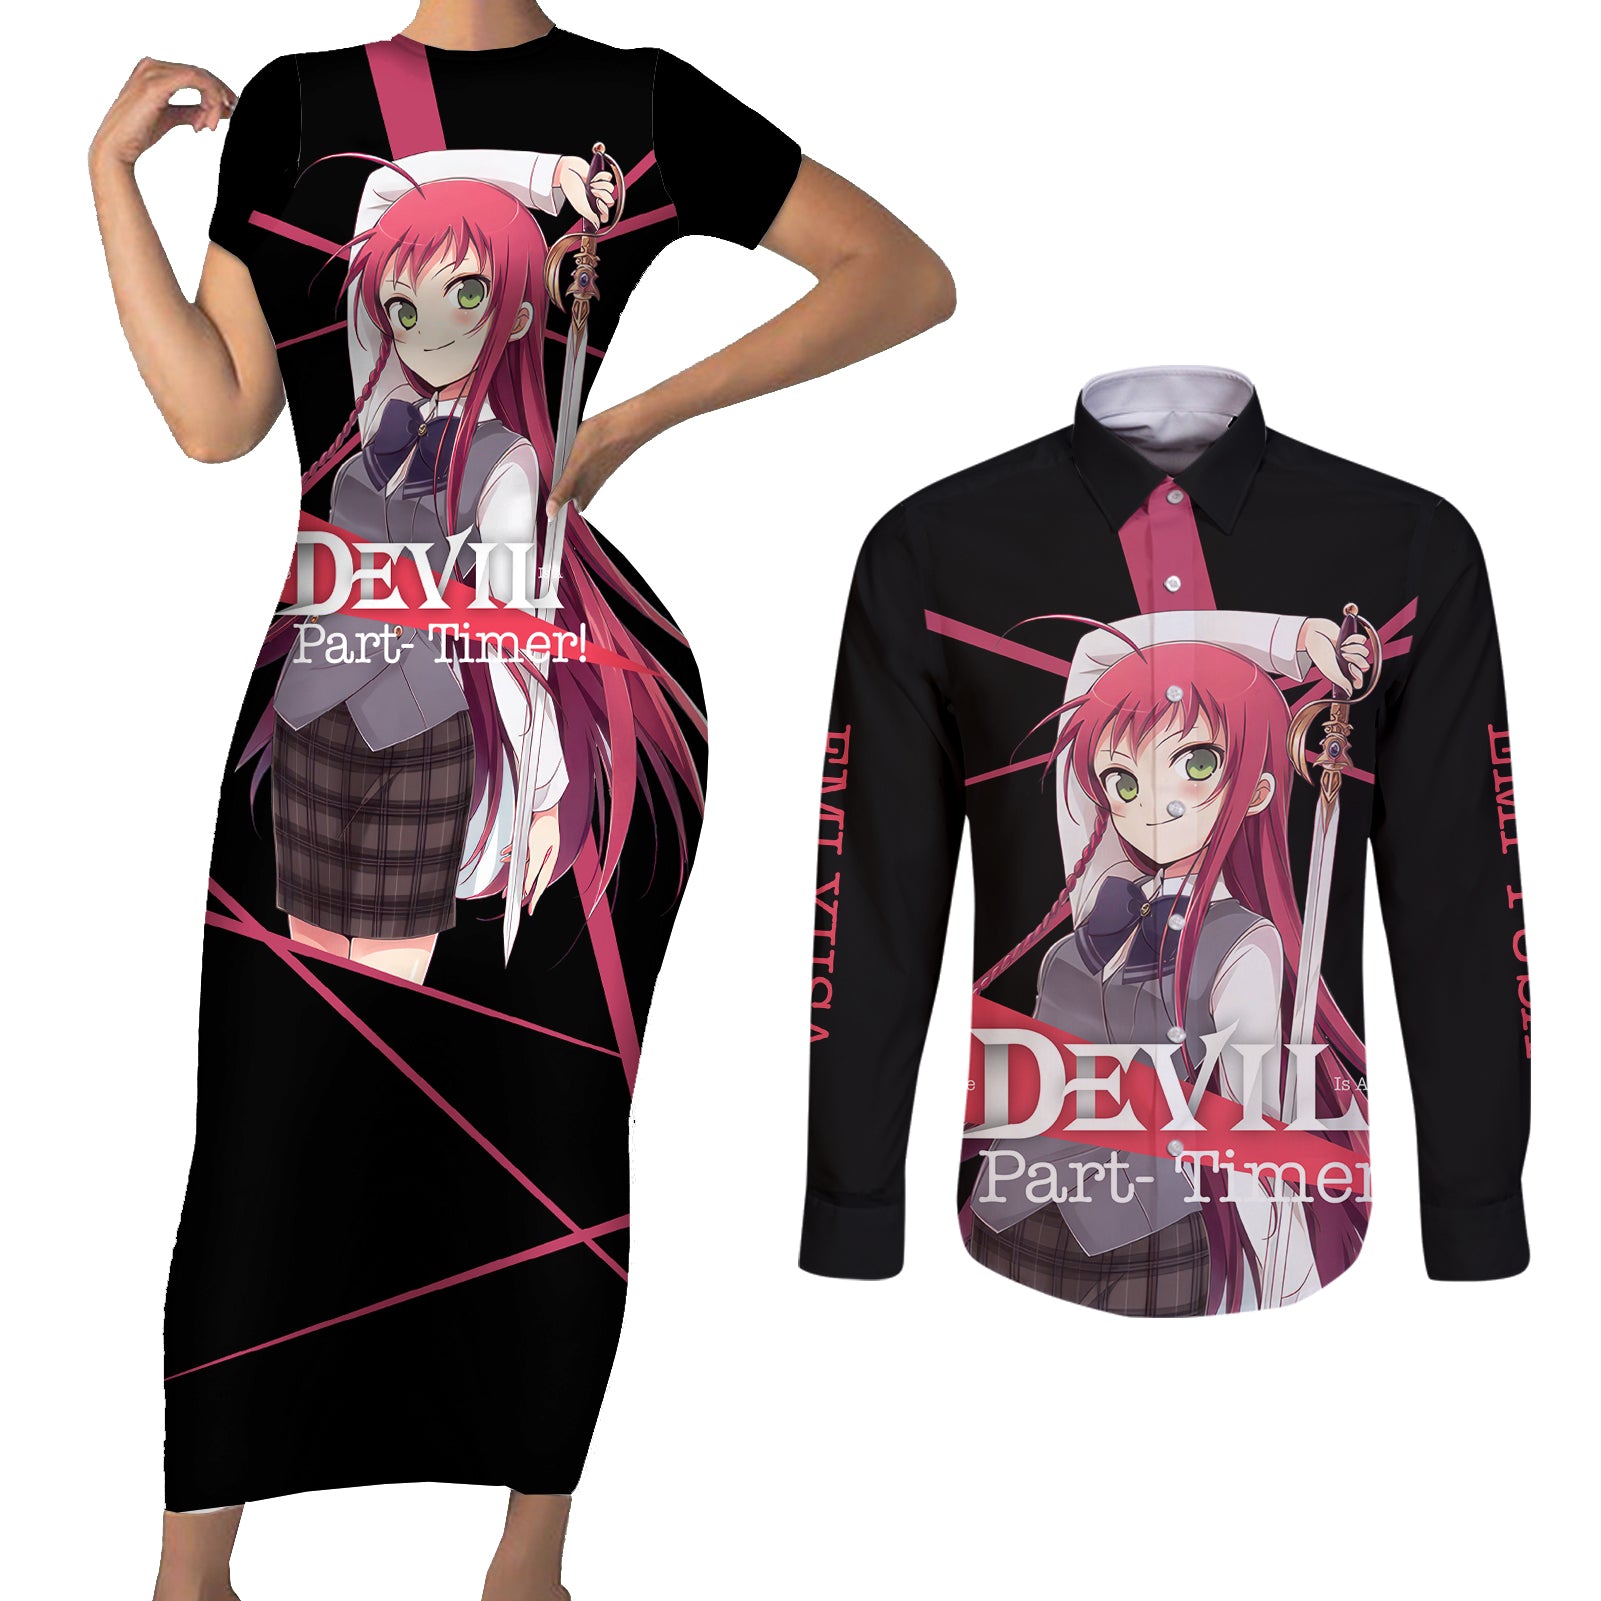 Emi Yusa The Devil Part Timer Couples Matching Short Sleeve Bodycon Dress and Long Sleeve Button Shirt Anime Style